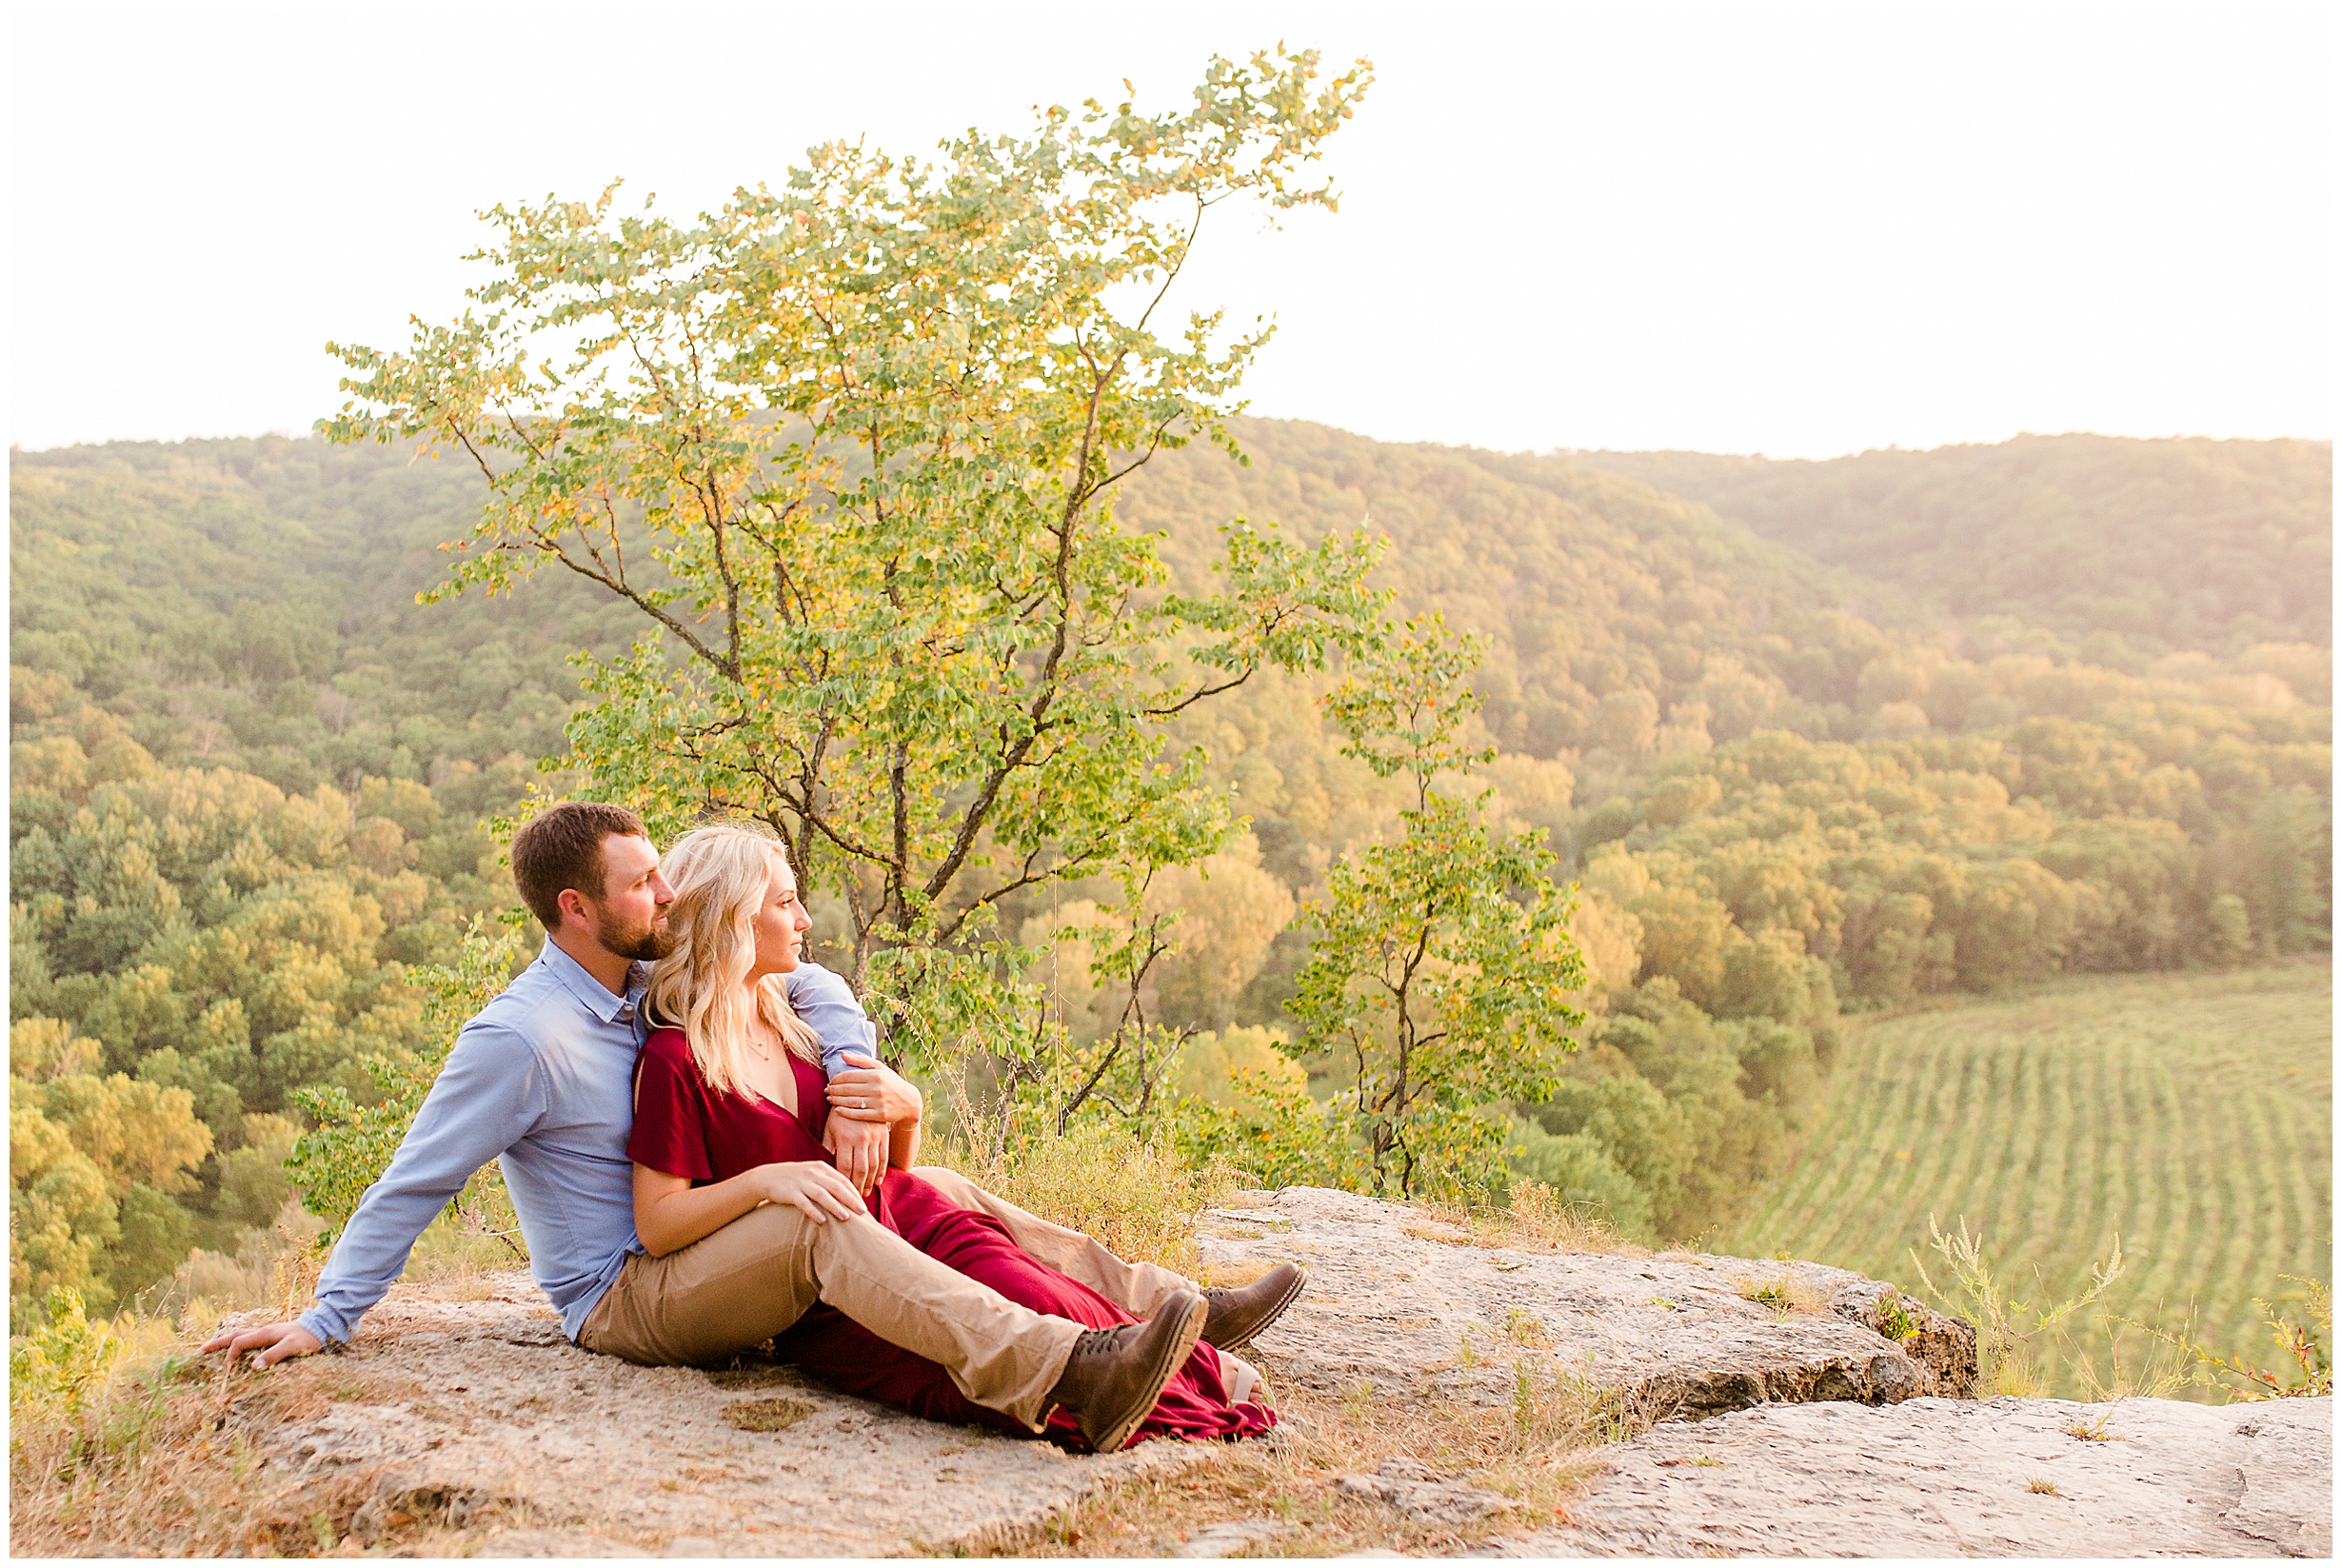 Yellow River Forest Engagement Session | Megan Snitker Photo-1.jpg